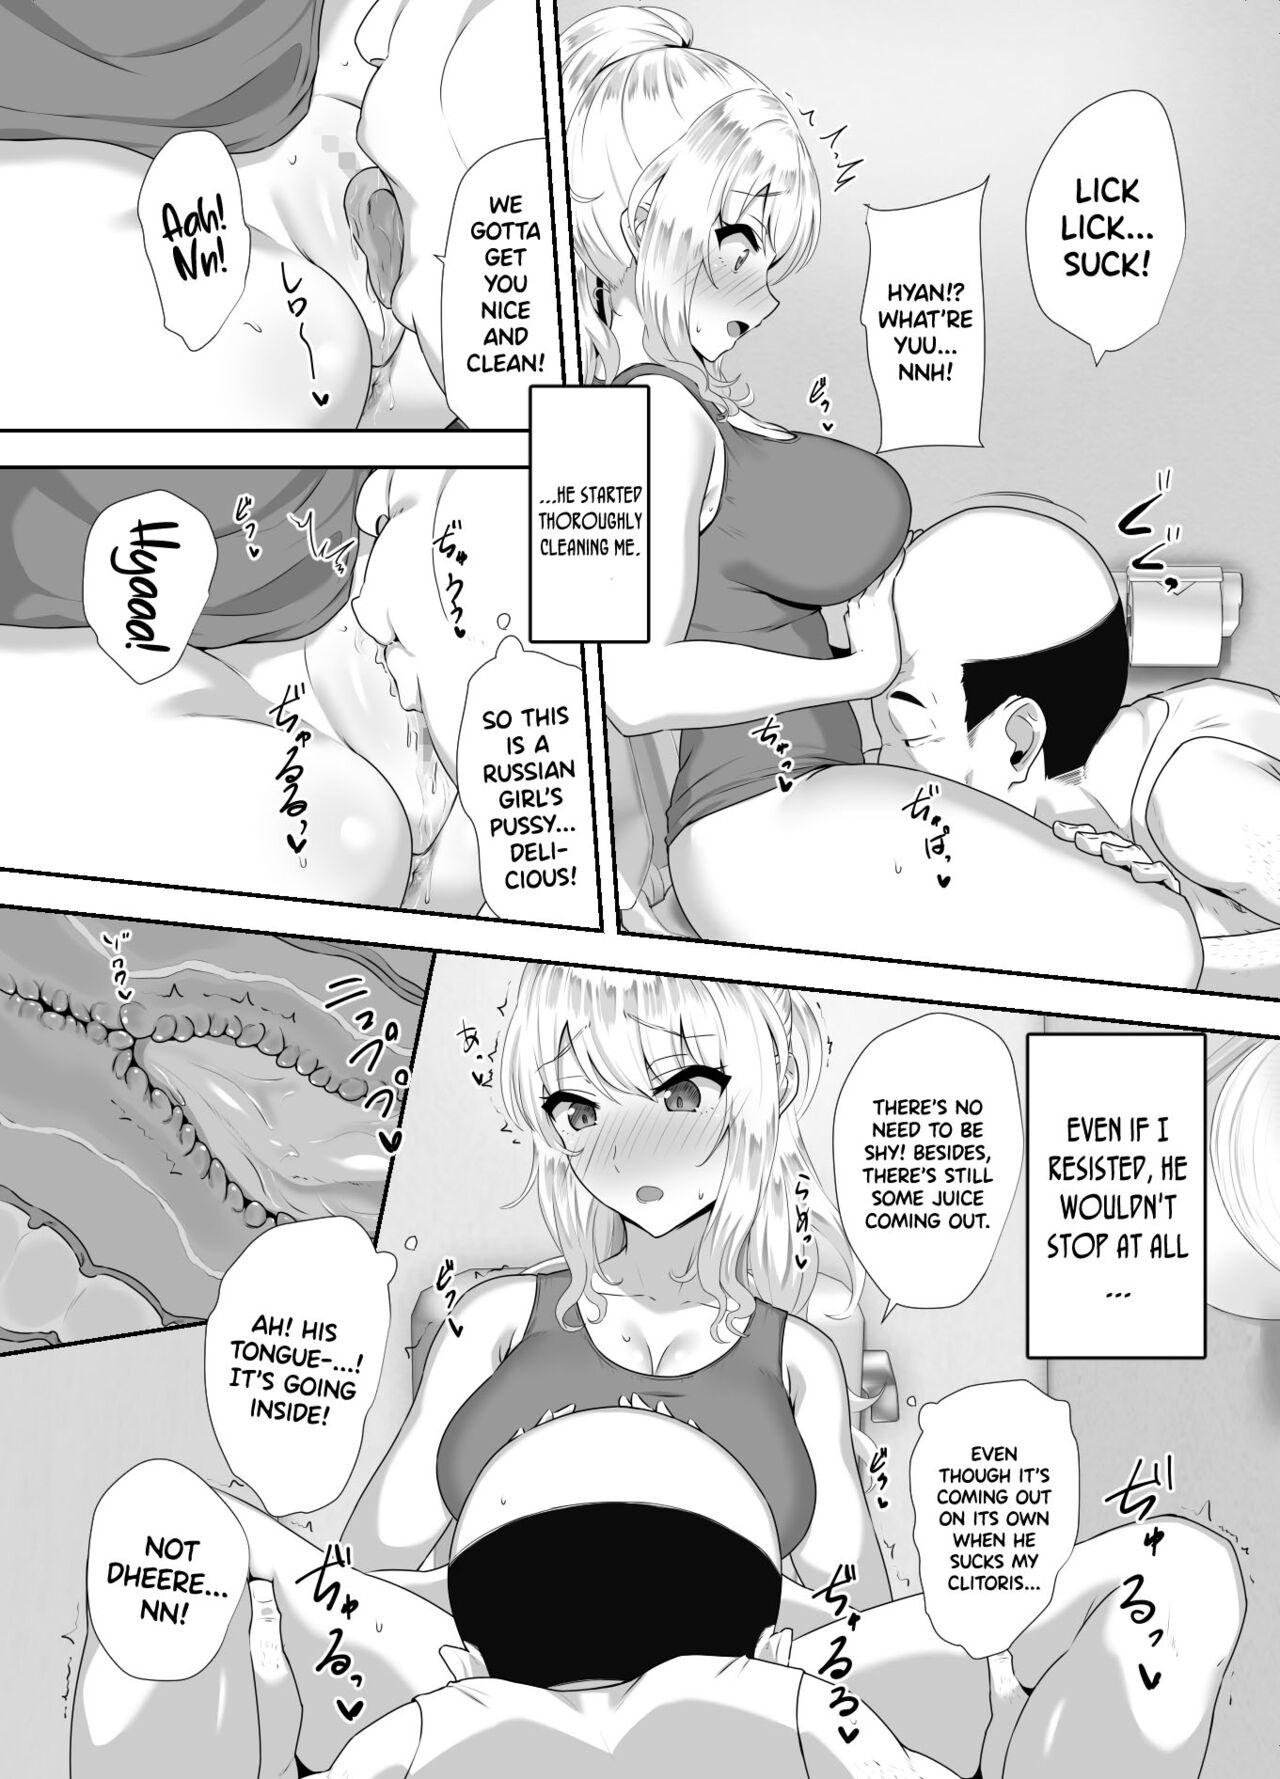 Play Russia-jin ga Osake de Nihonjin ni Makeru Wakenai Deshou? | There's No Way a Russian Could Lose to a Japanese Person In Drinking, Right? - Original Shaved Pussy - Page 11